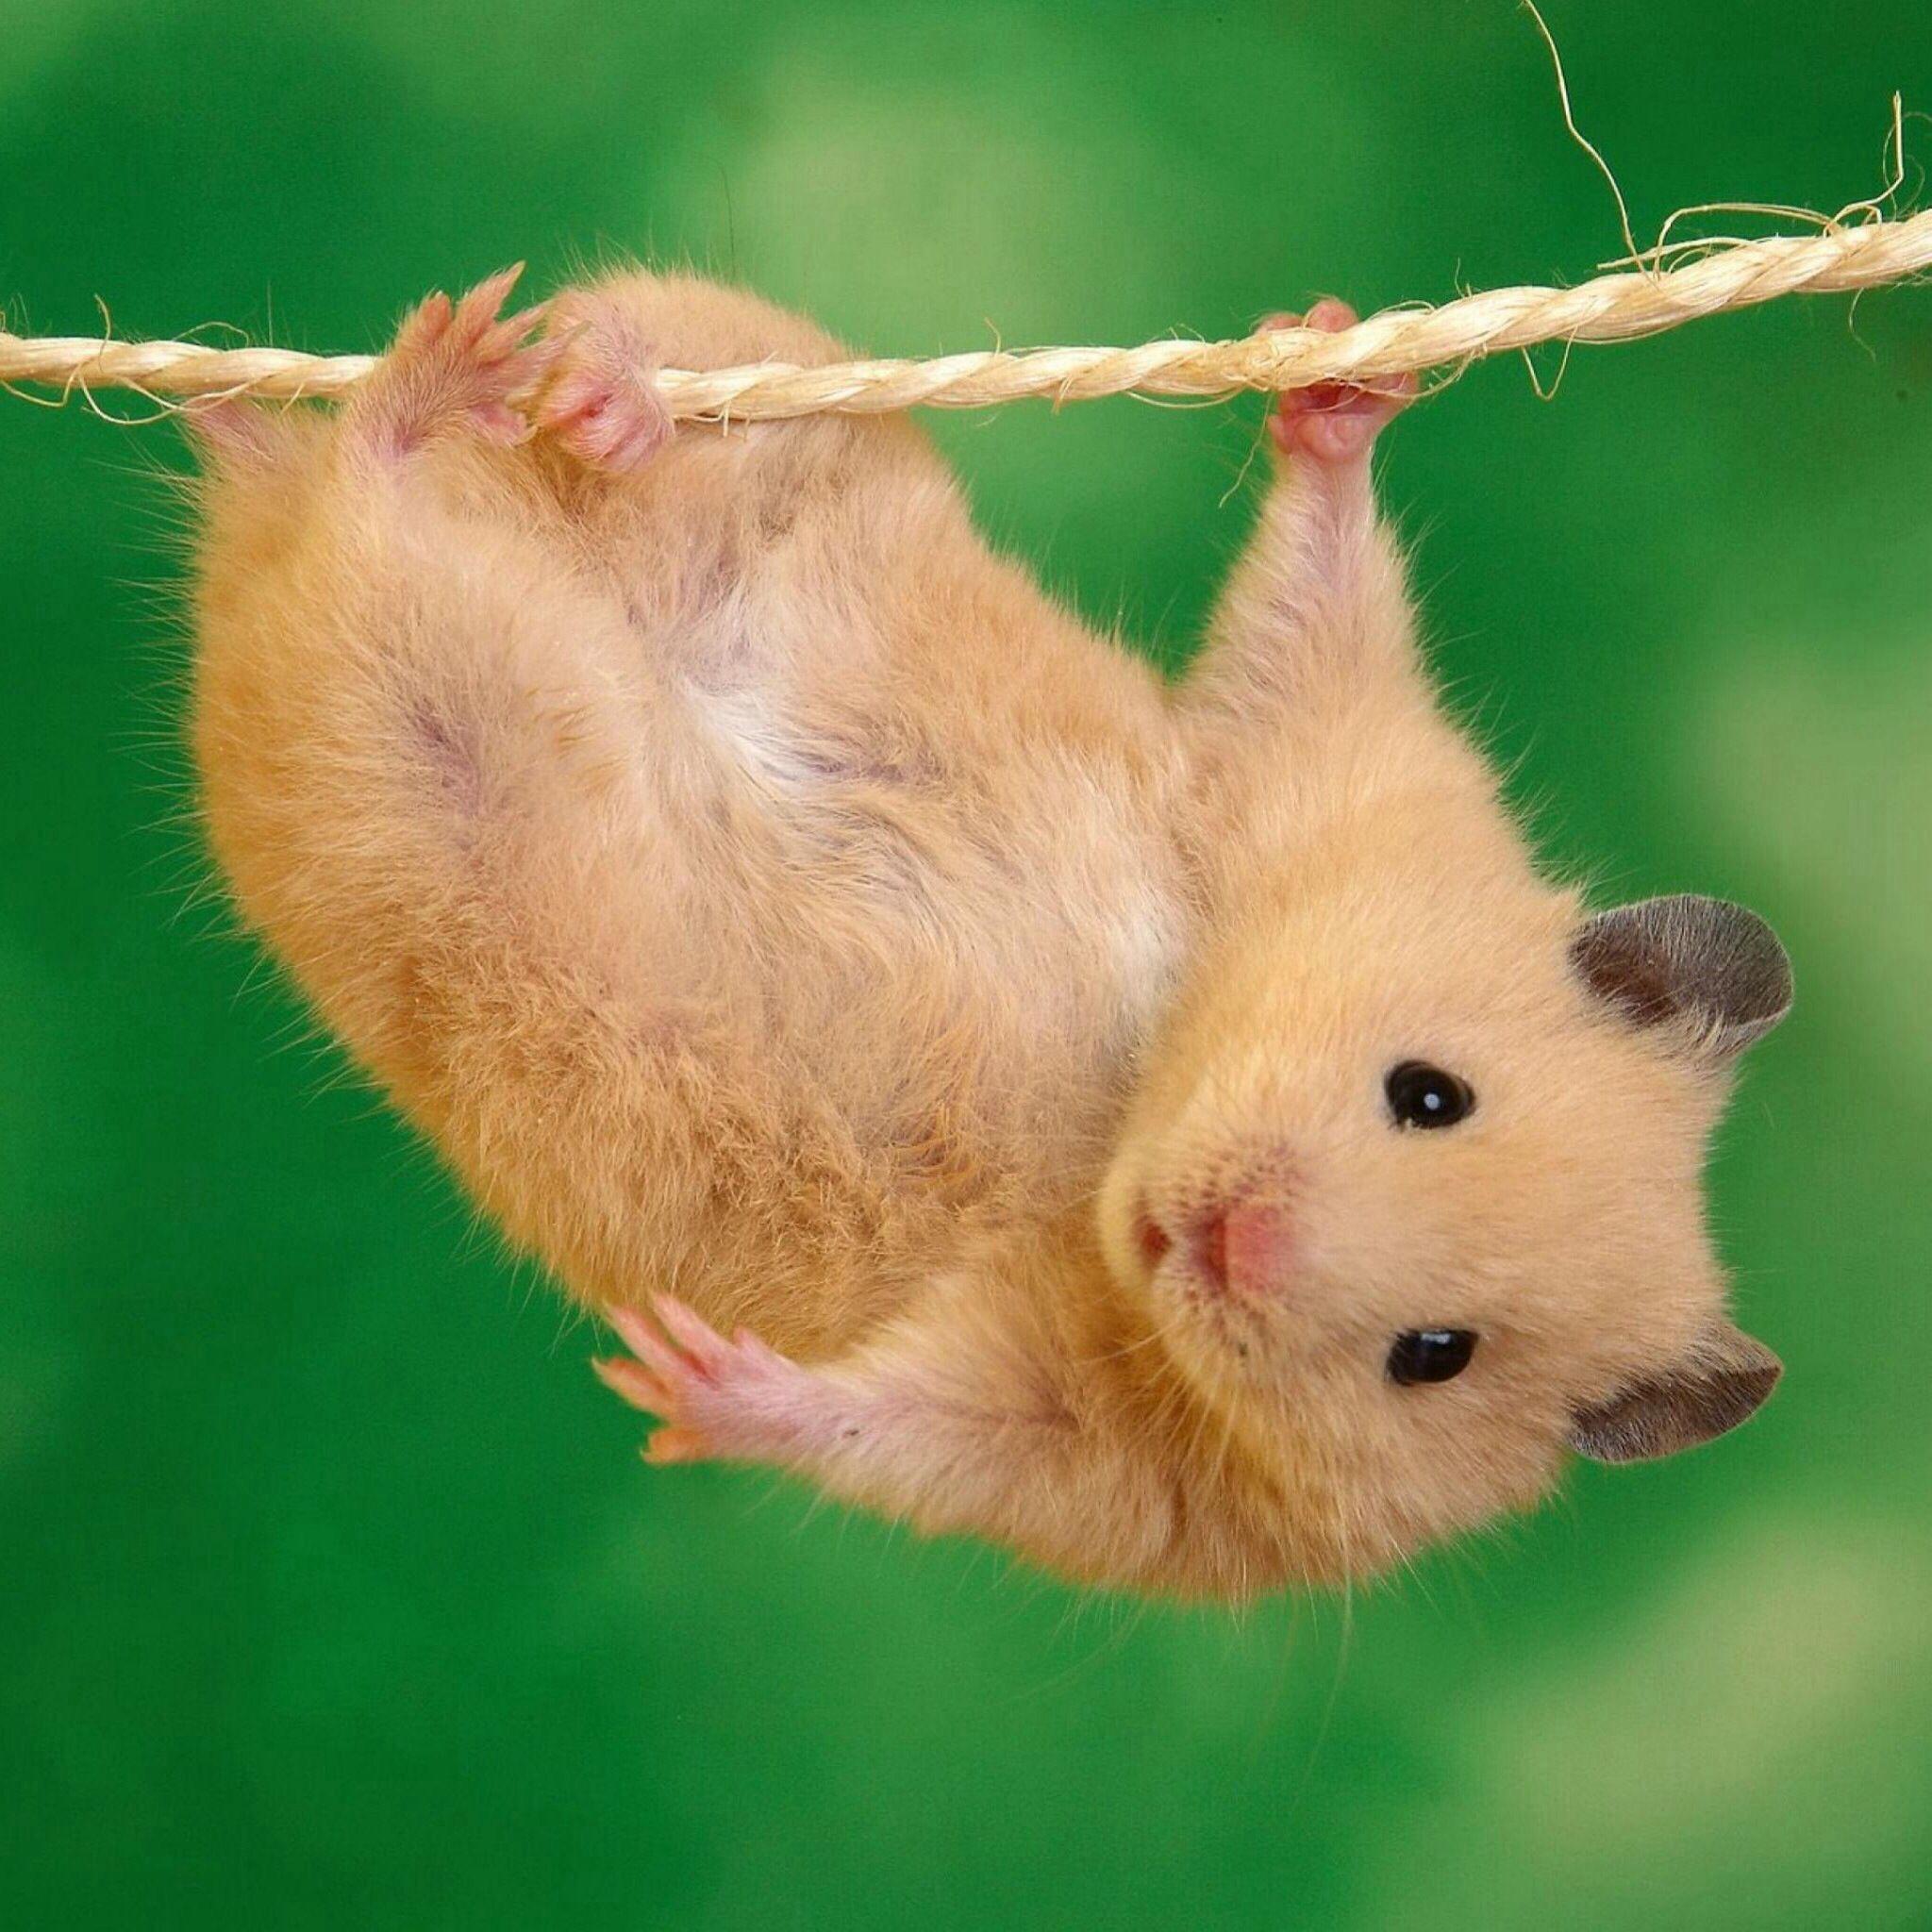 Hamster (Love them but not allowed in Australia). Cute animals